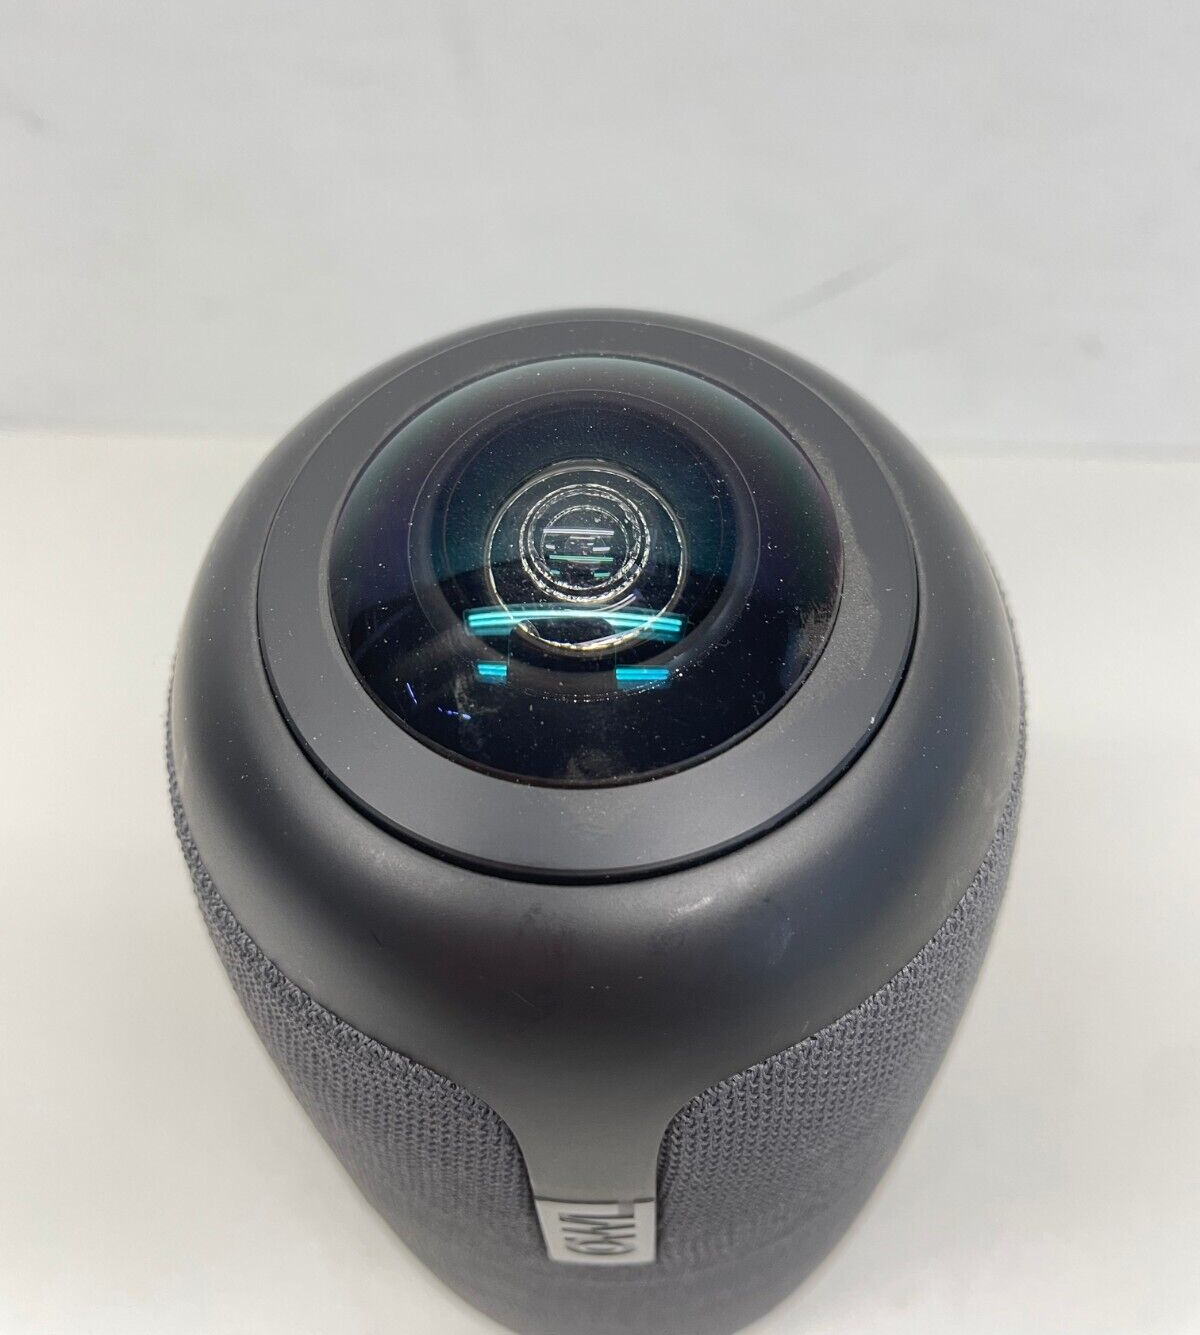 Owl Labs MTW100 Meeting Owl 360 Degree Video Conference Camera - Black